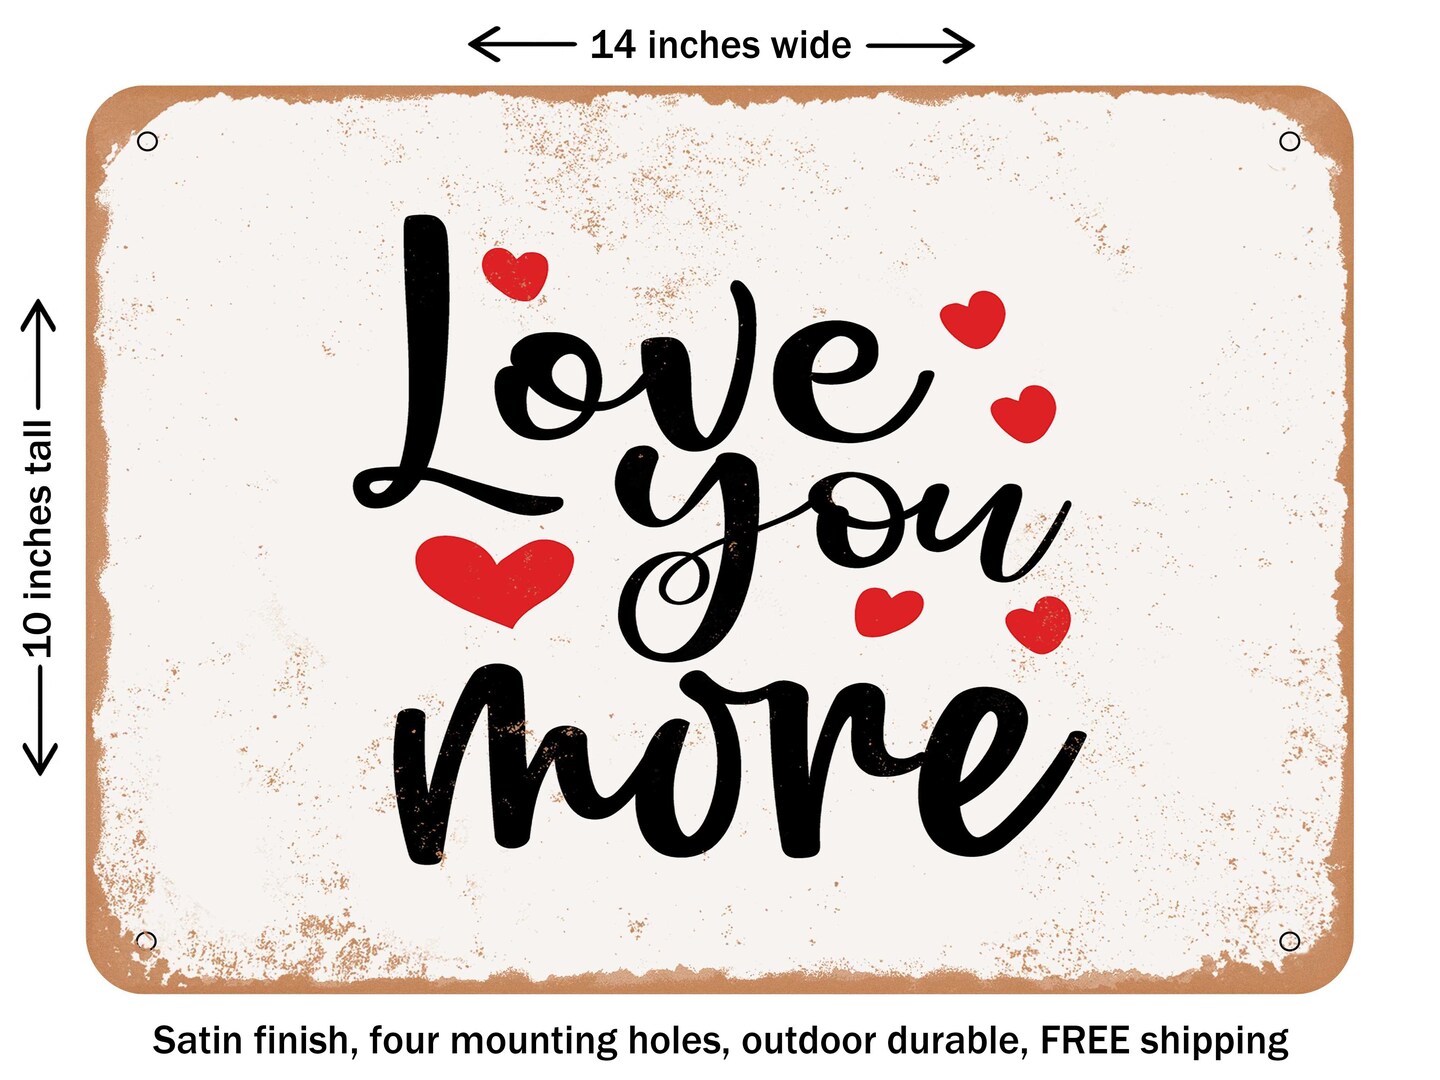 DECORATIVE METAL SIGN - Love You More - 3 - Vintage Rusty Look